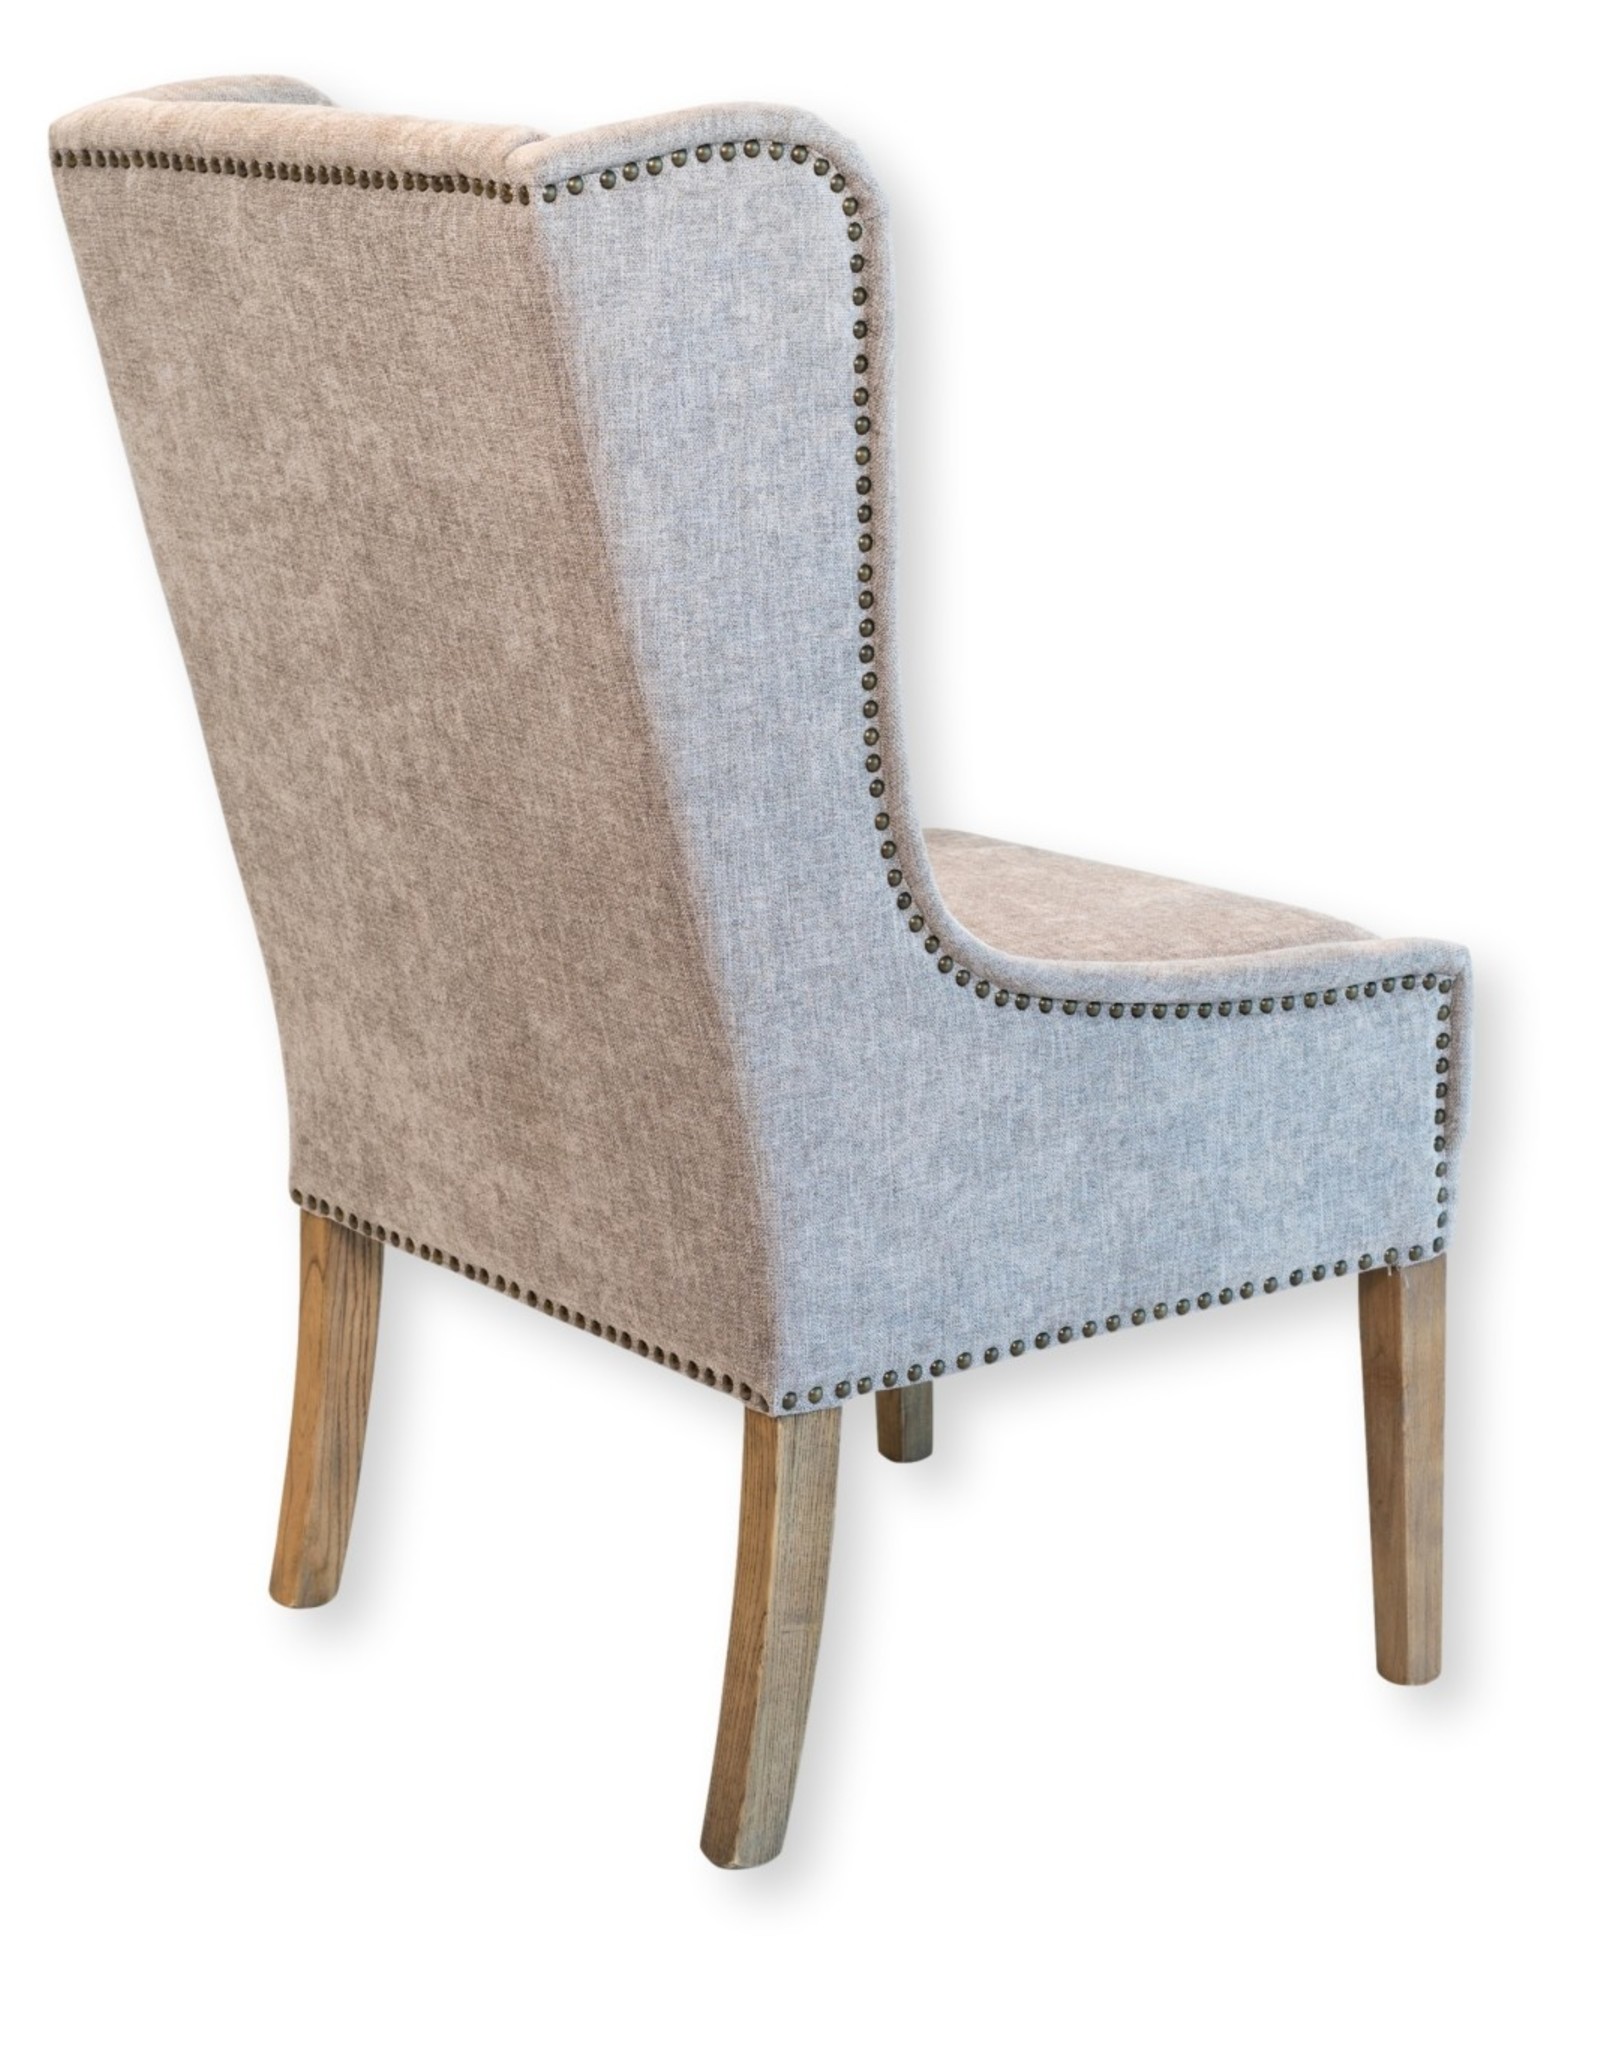 Nest Home Collections Felicia Arm Chair - Anew Gray (Specify gray or natural legs)